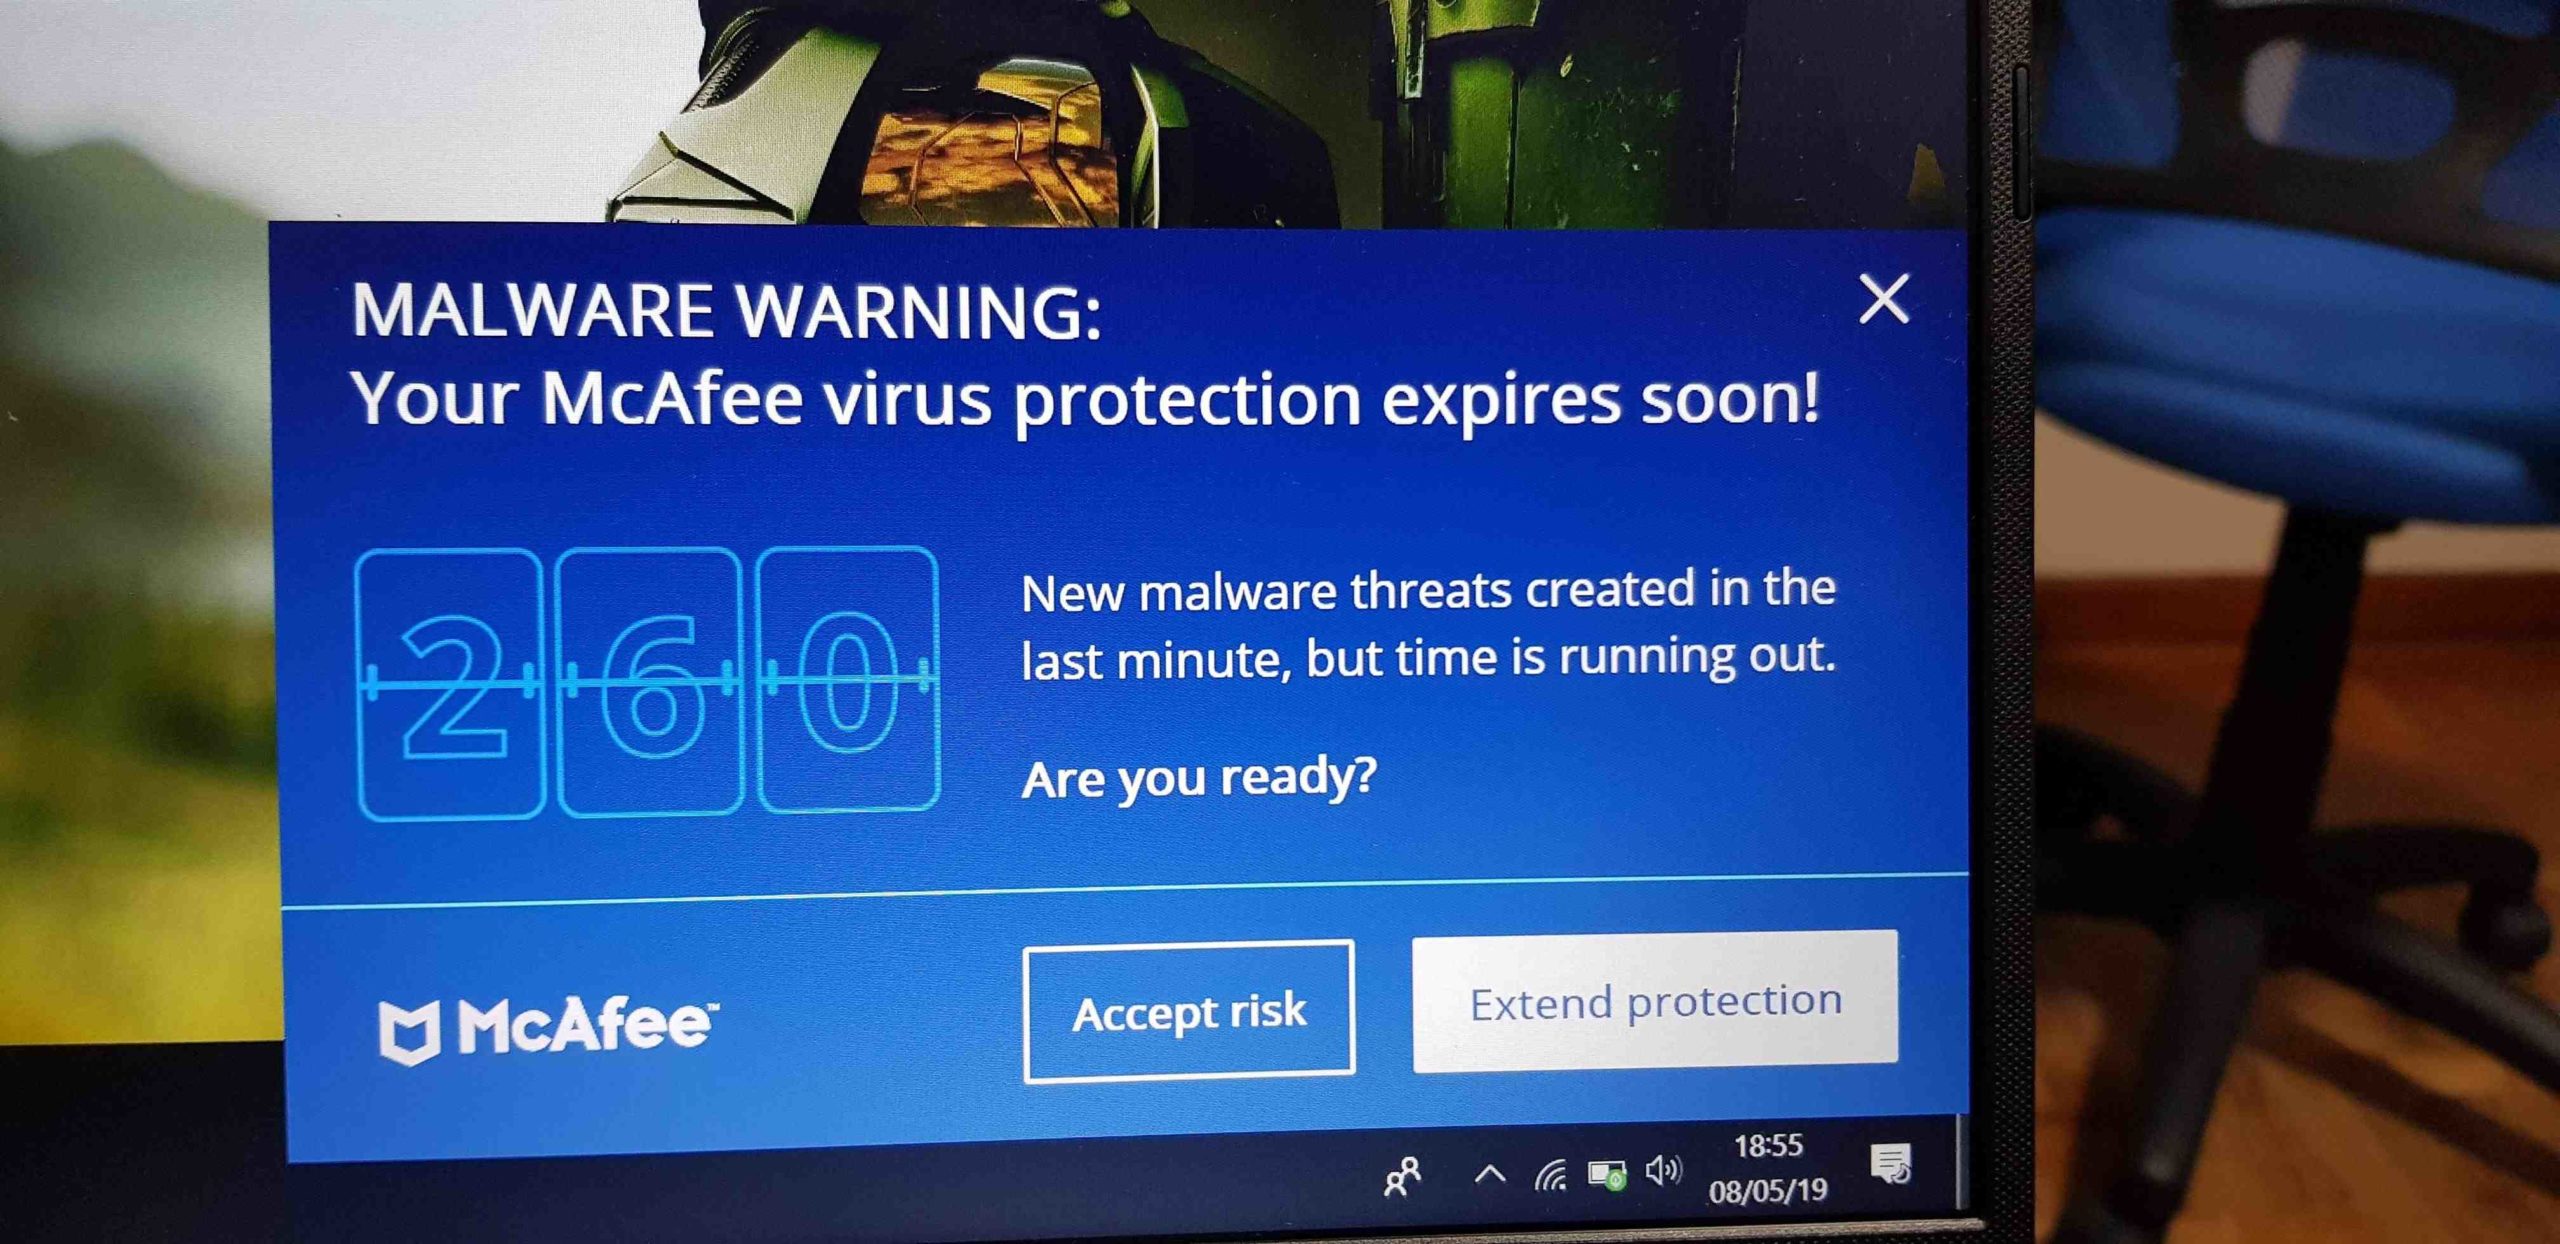 Is McAfee actually malware?